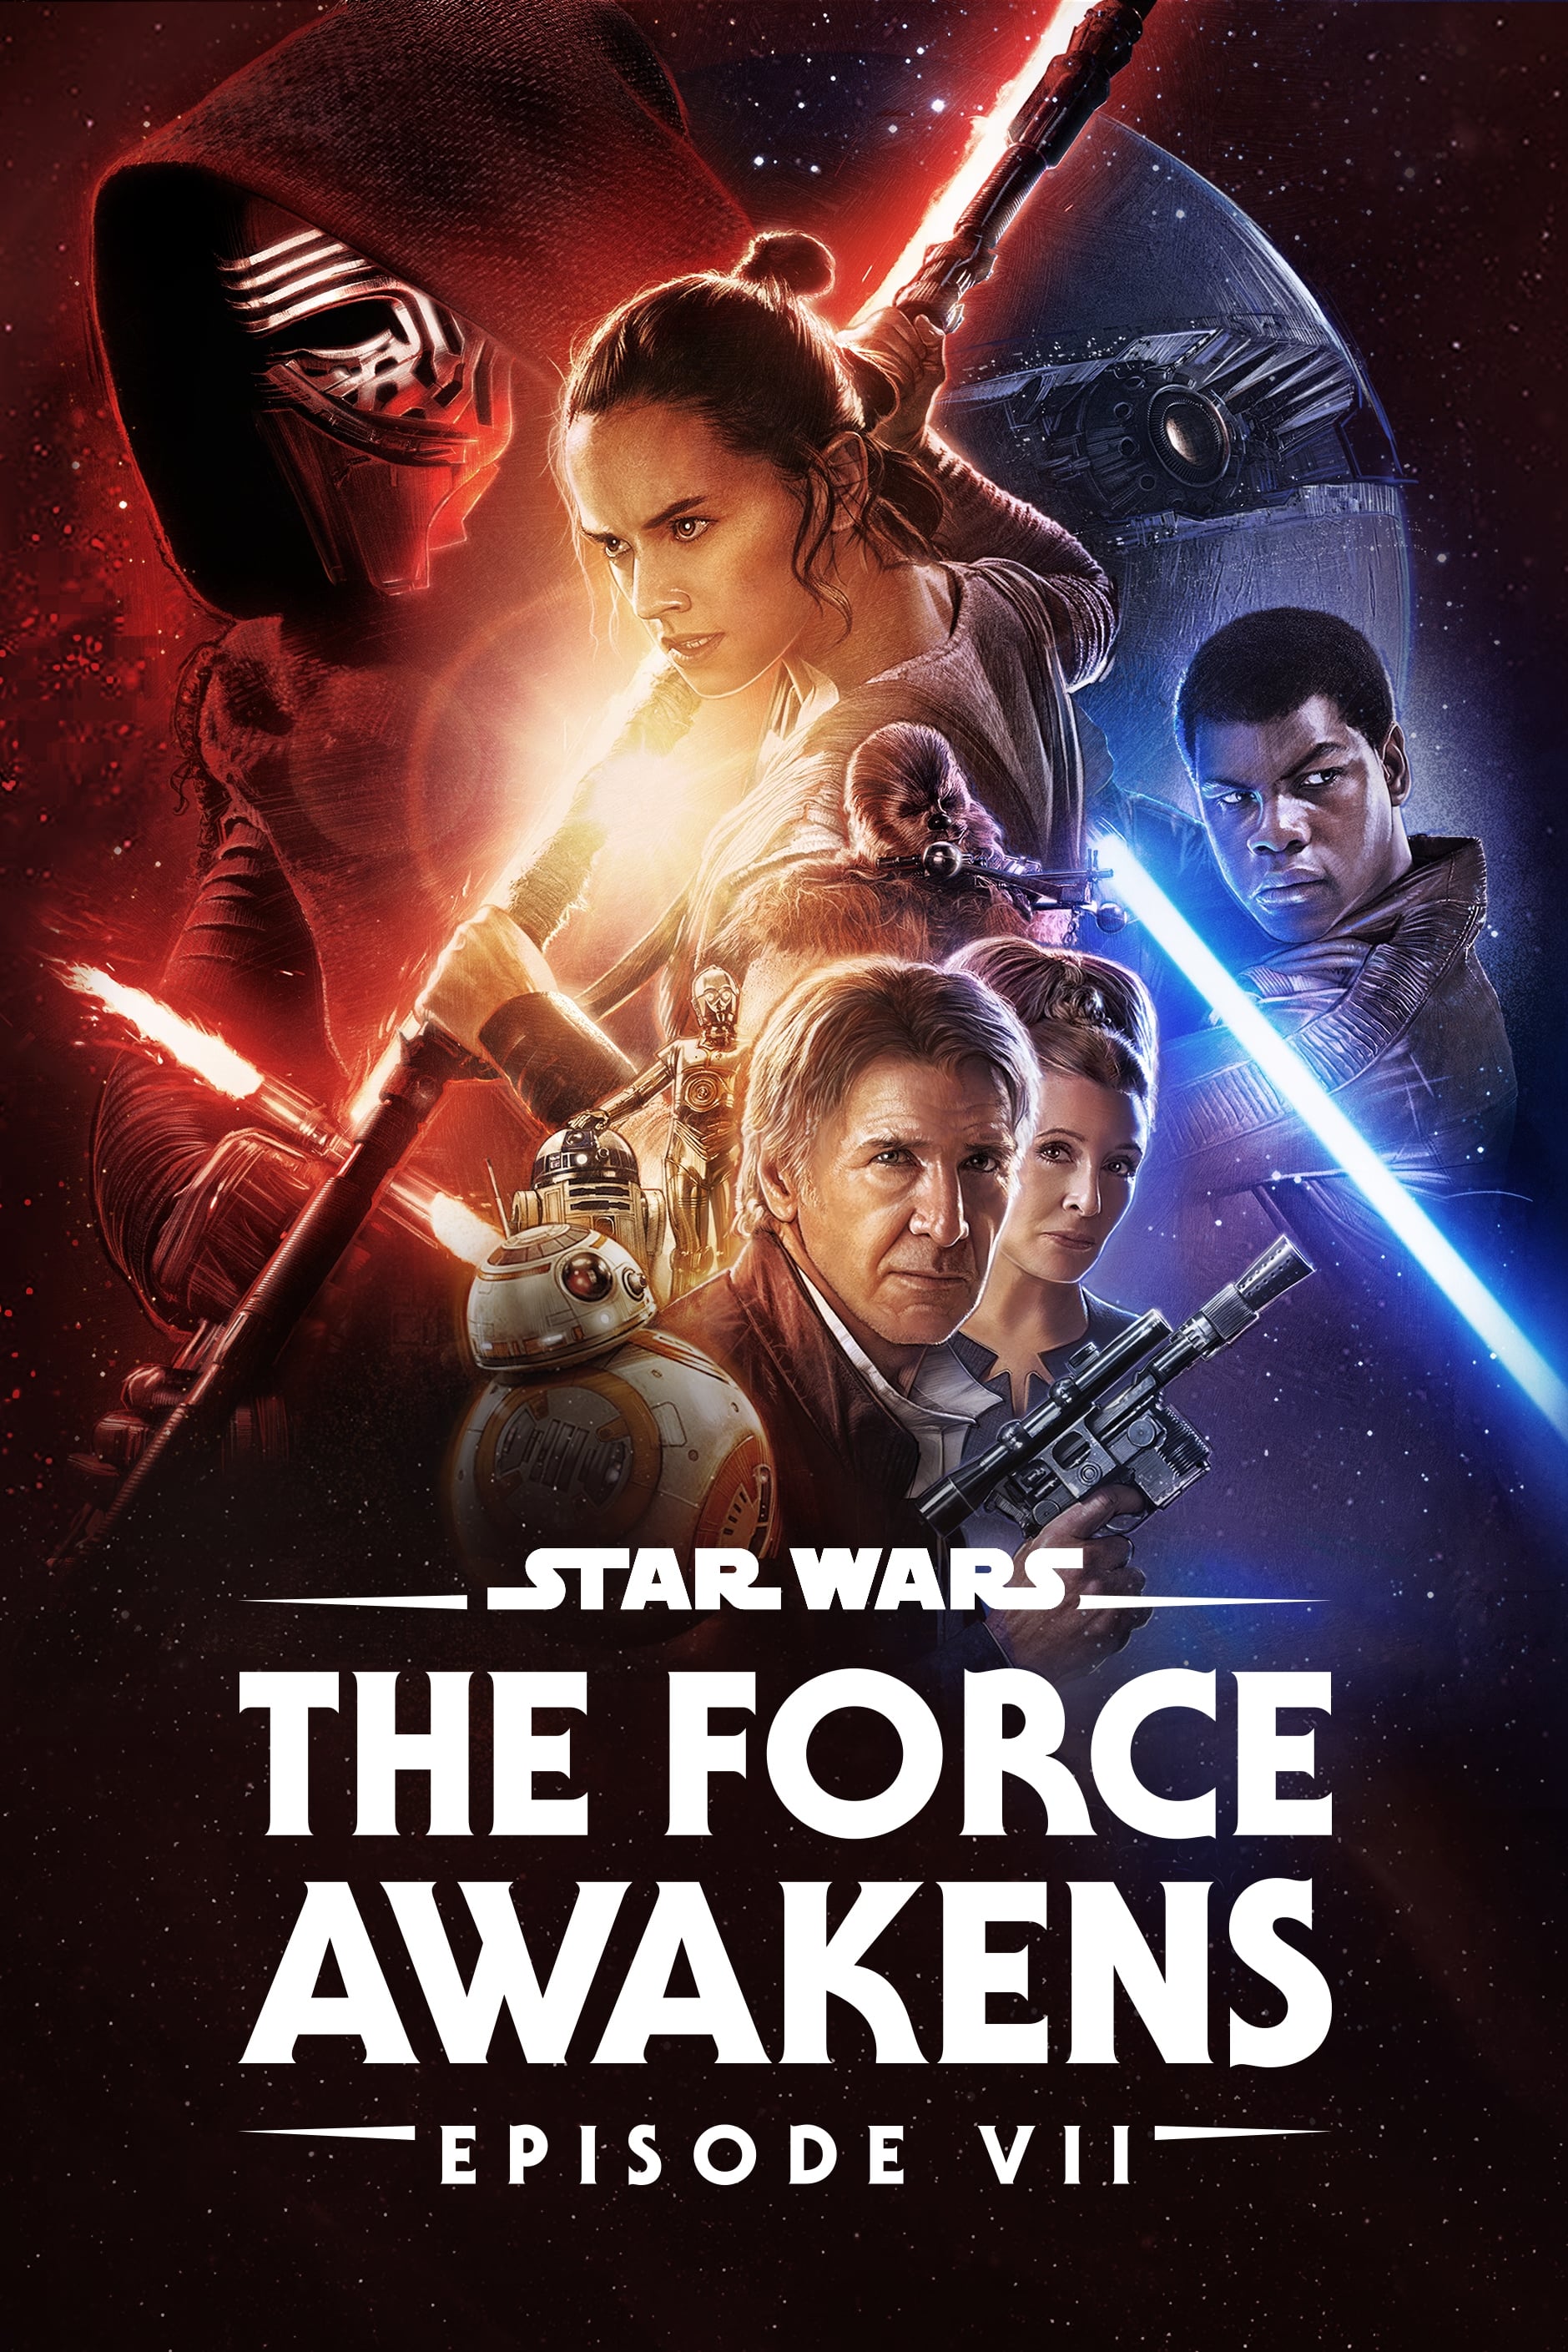 the force awakens movie review